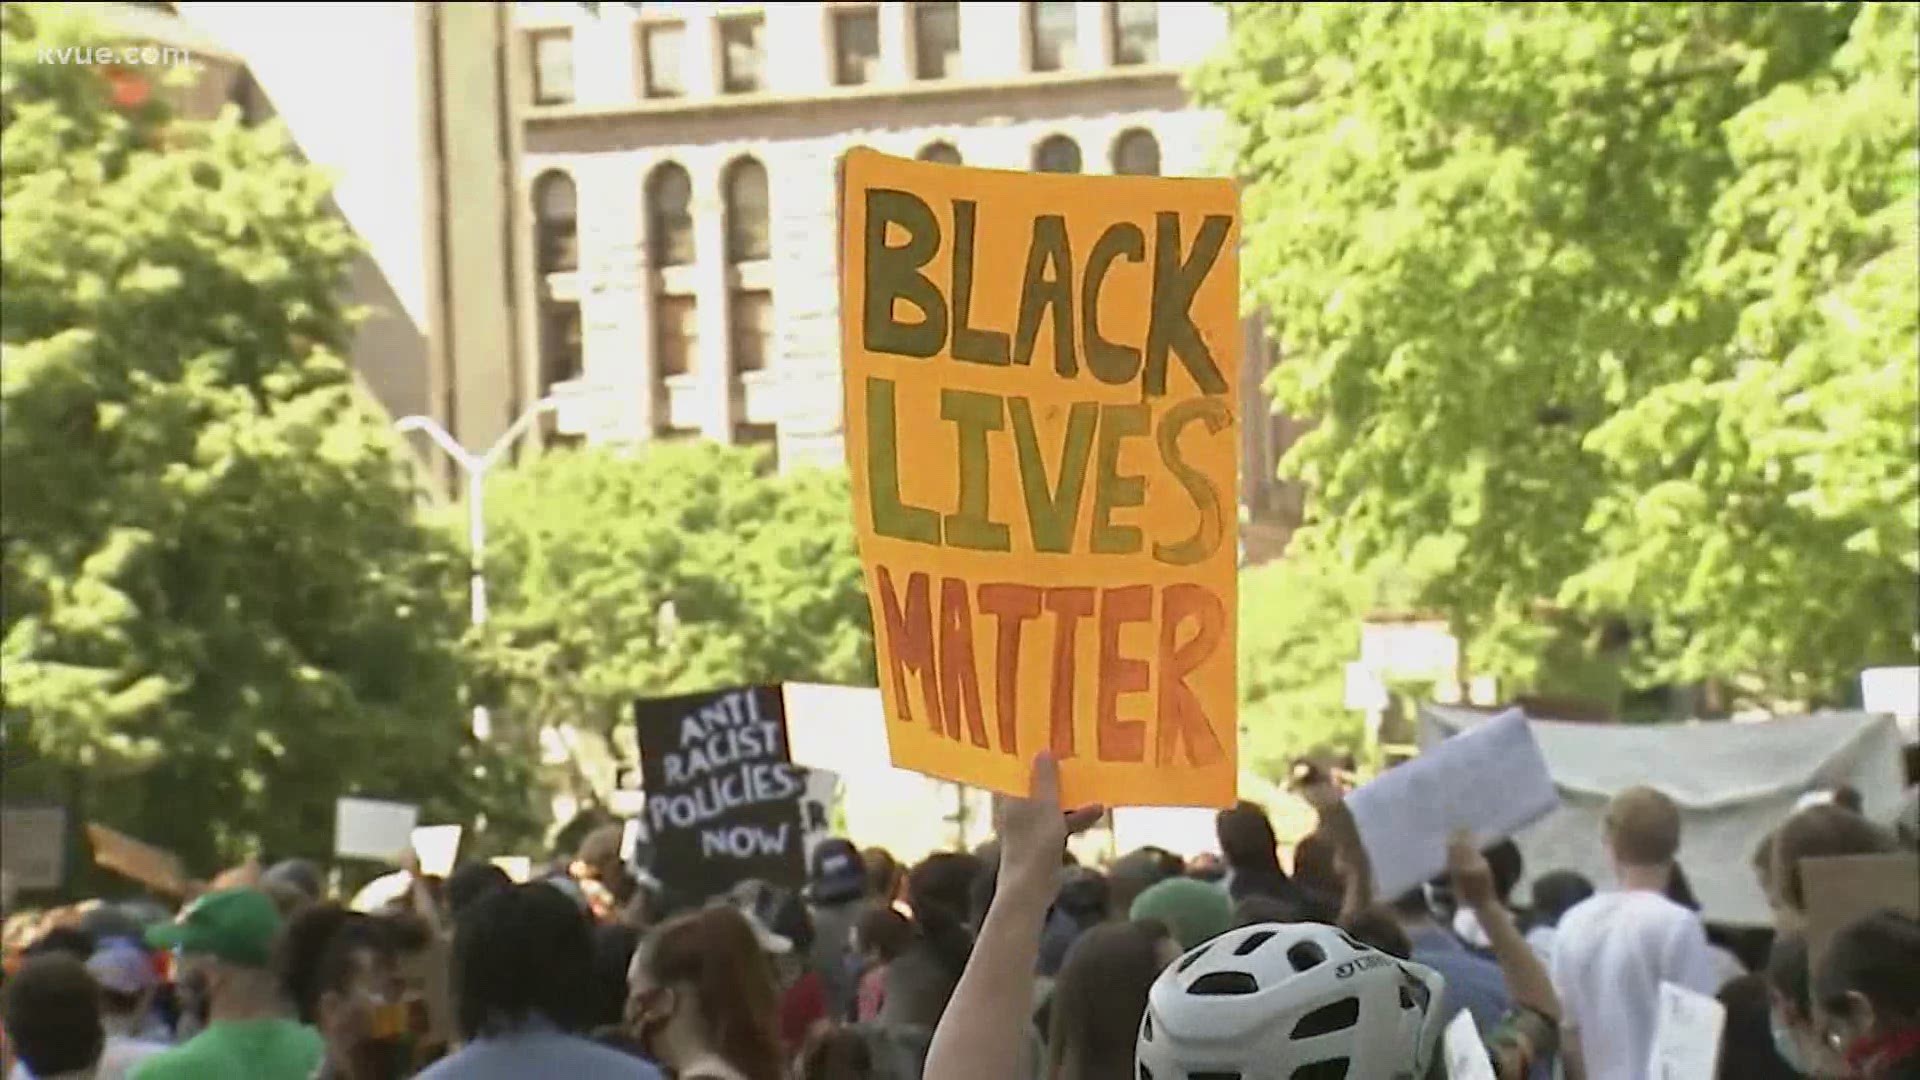 Protests over George Floyd's death in Minneapolis have sparked policy changes across the country. KVUE's Mike Marut shows what has changed so far.